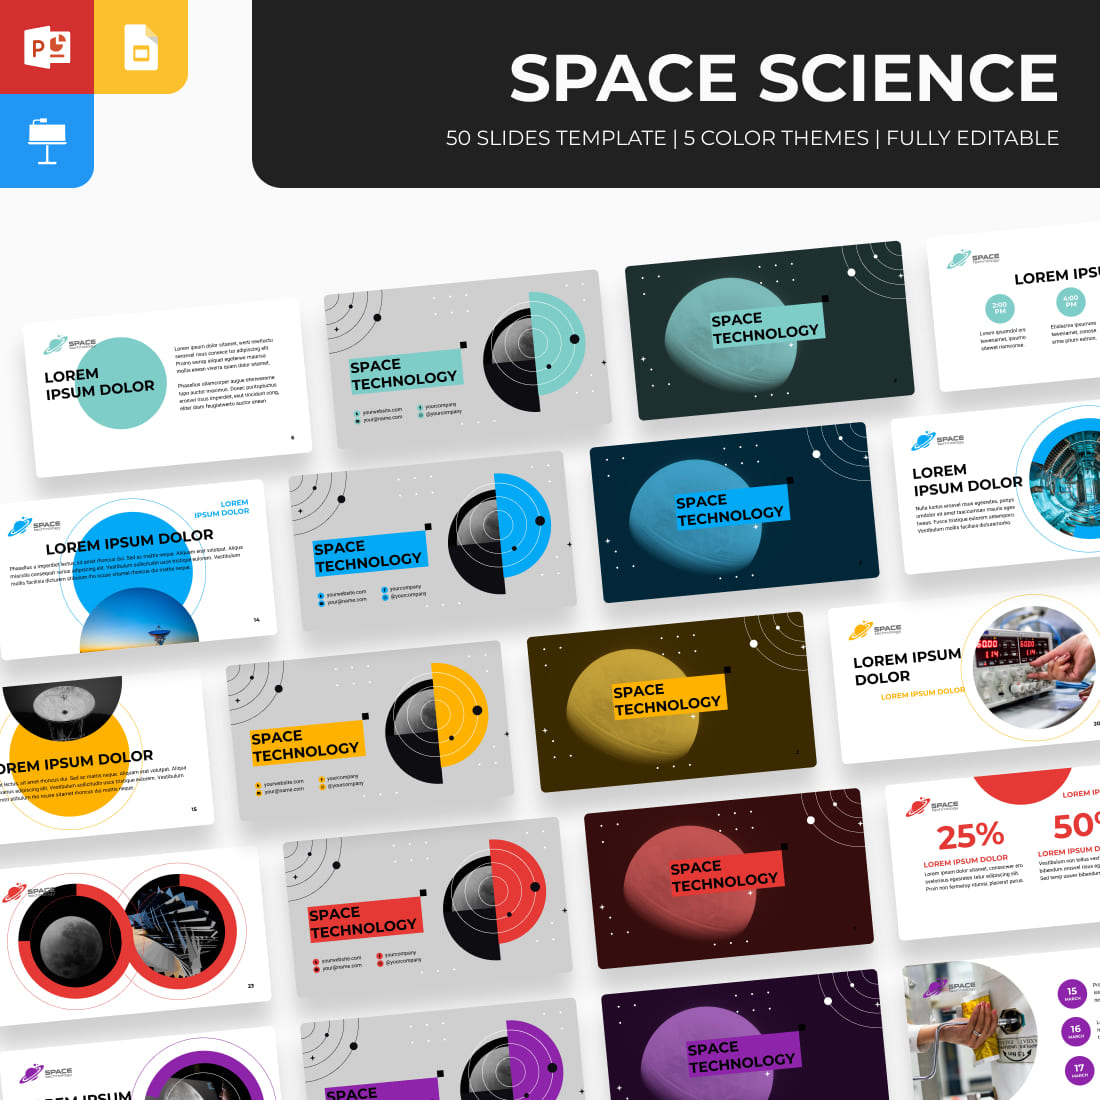 Space Science Presentation Template.